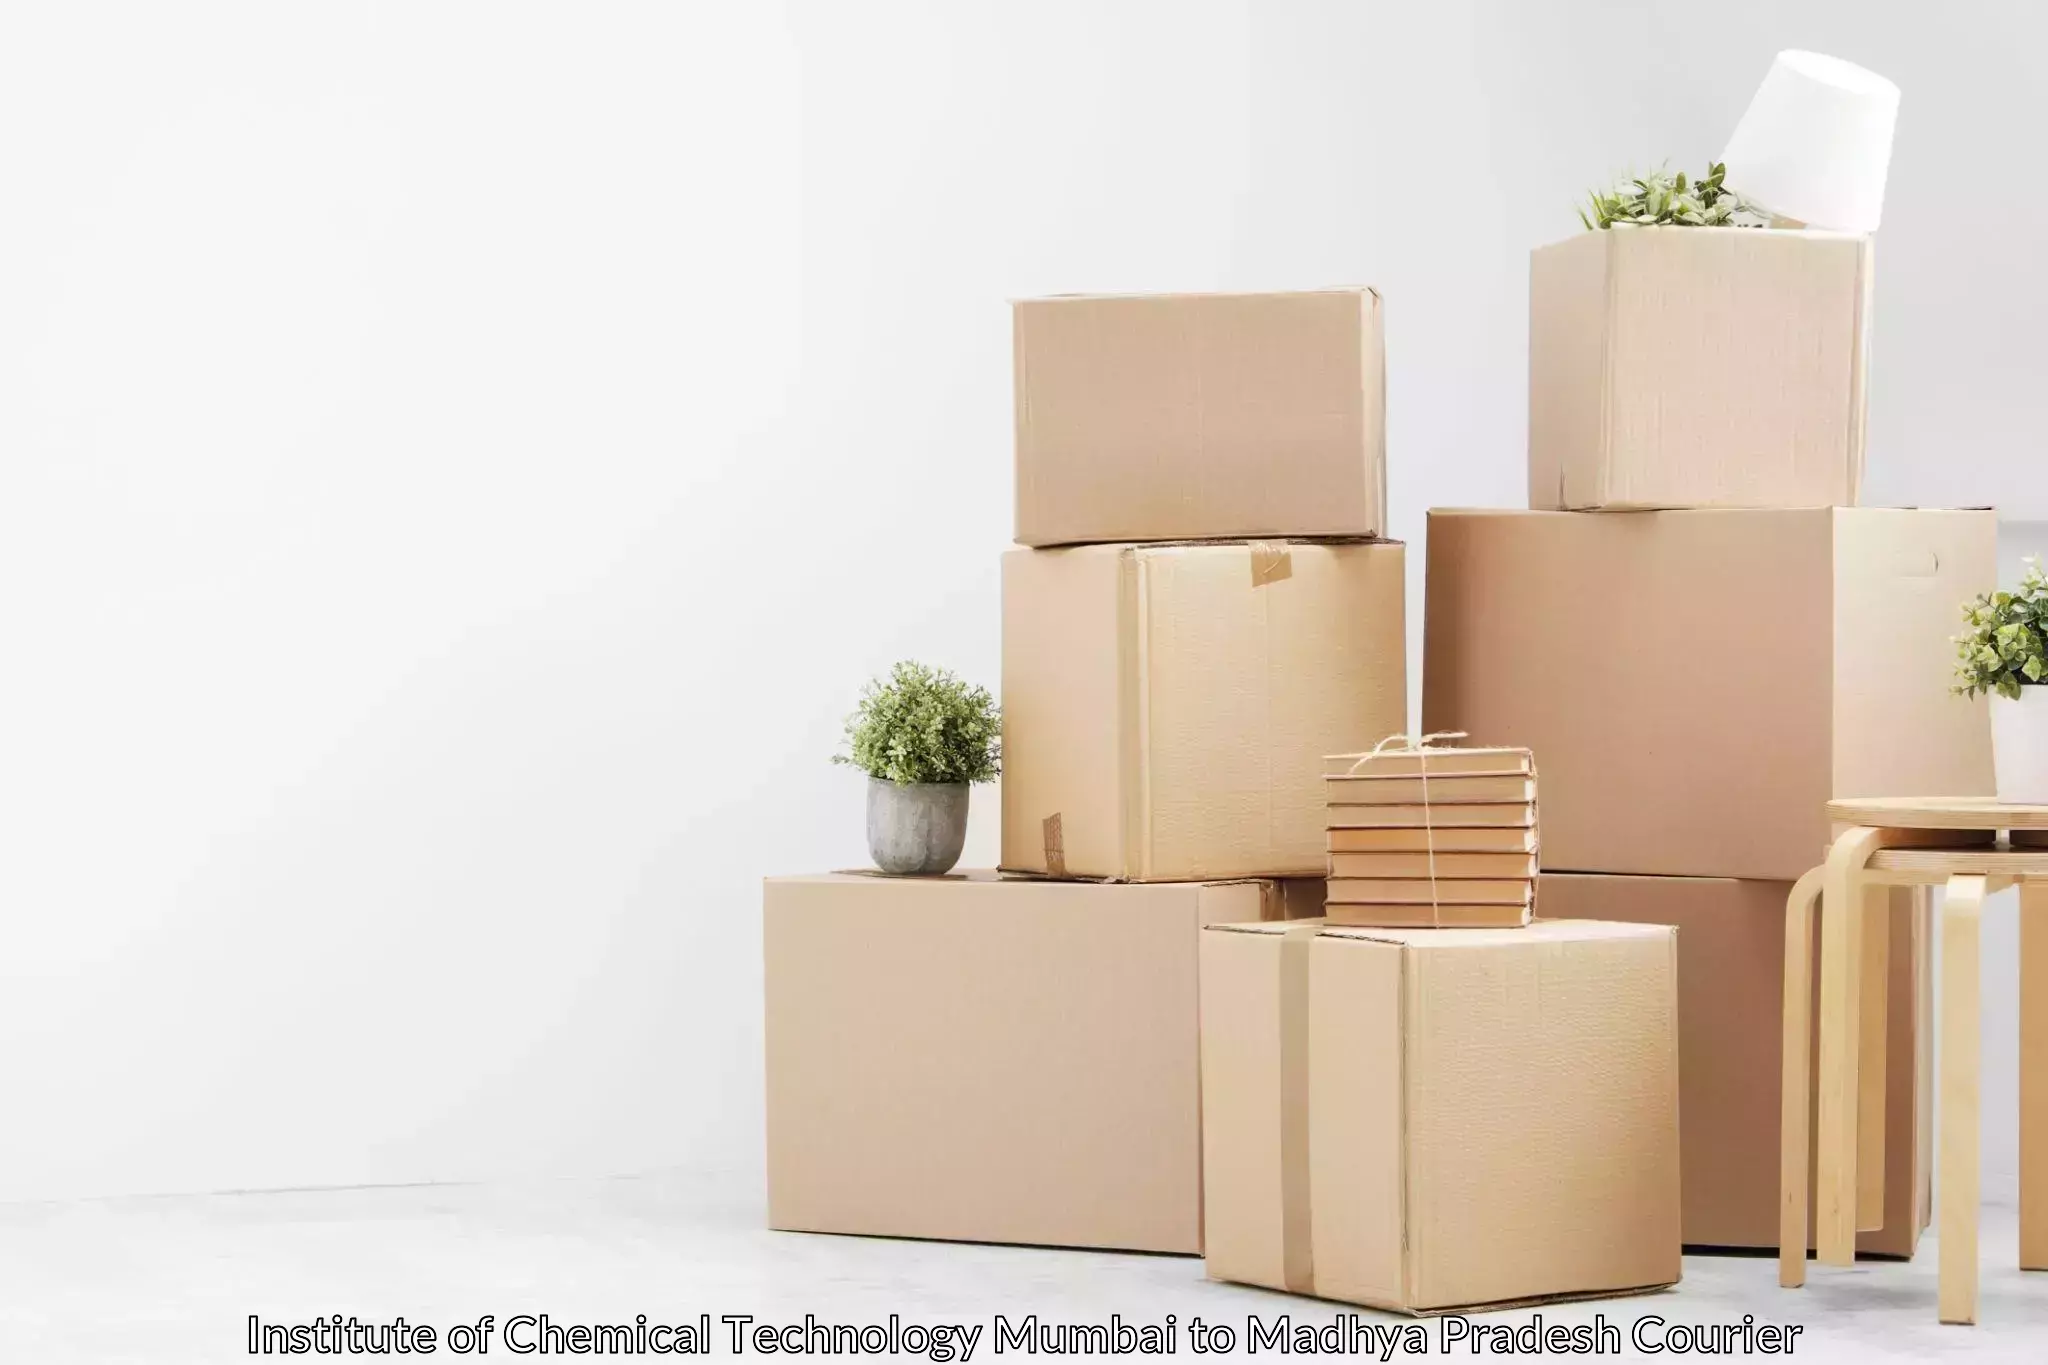 Professional movers and packers Institute of Chemical Technology Mumbai to BHEL Bhopal